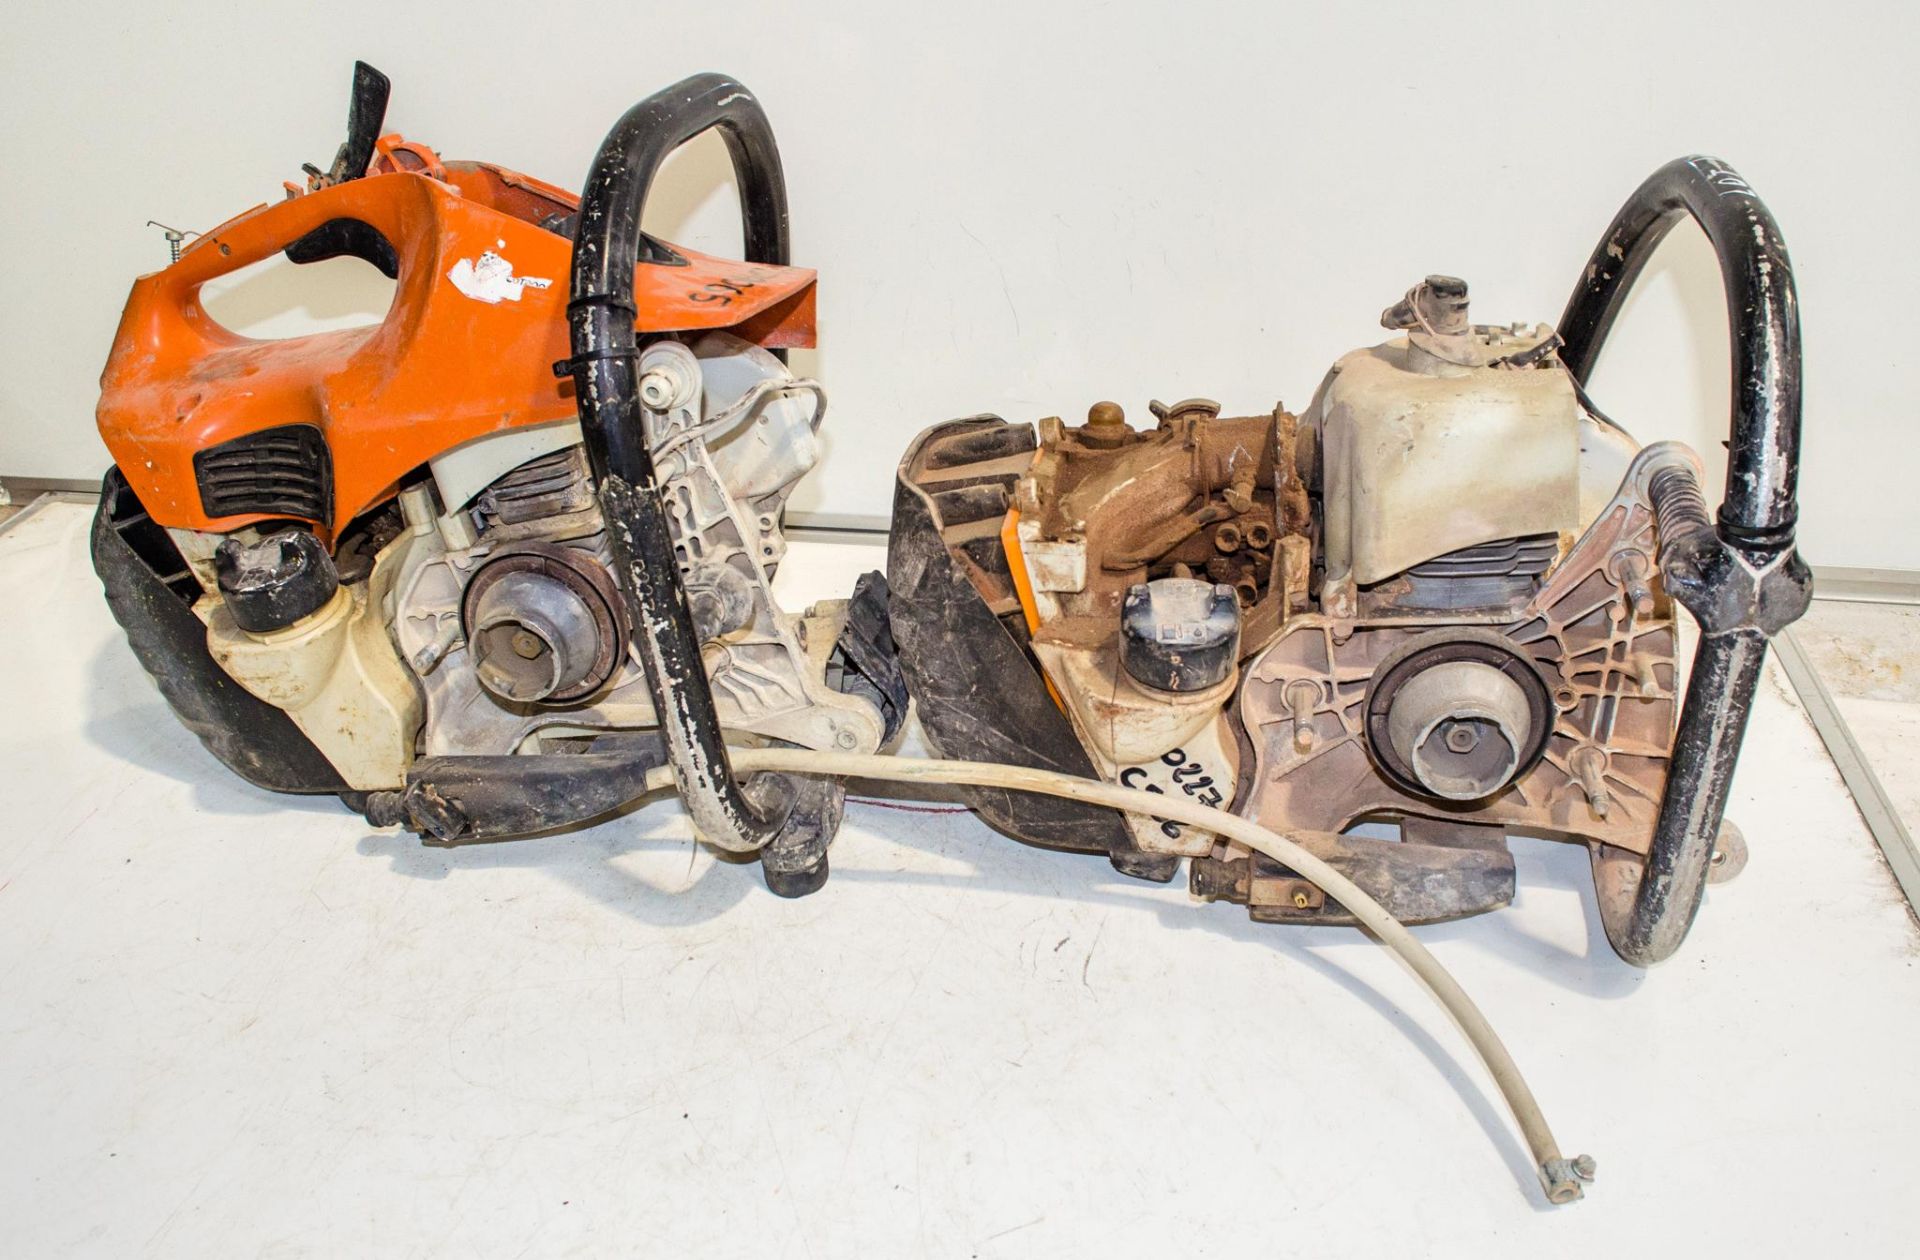 2 - Stihl TS410 petrol driven cut off saw ** Both with parts missing ** - Image 2 of 2